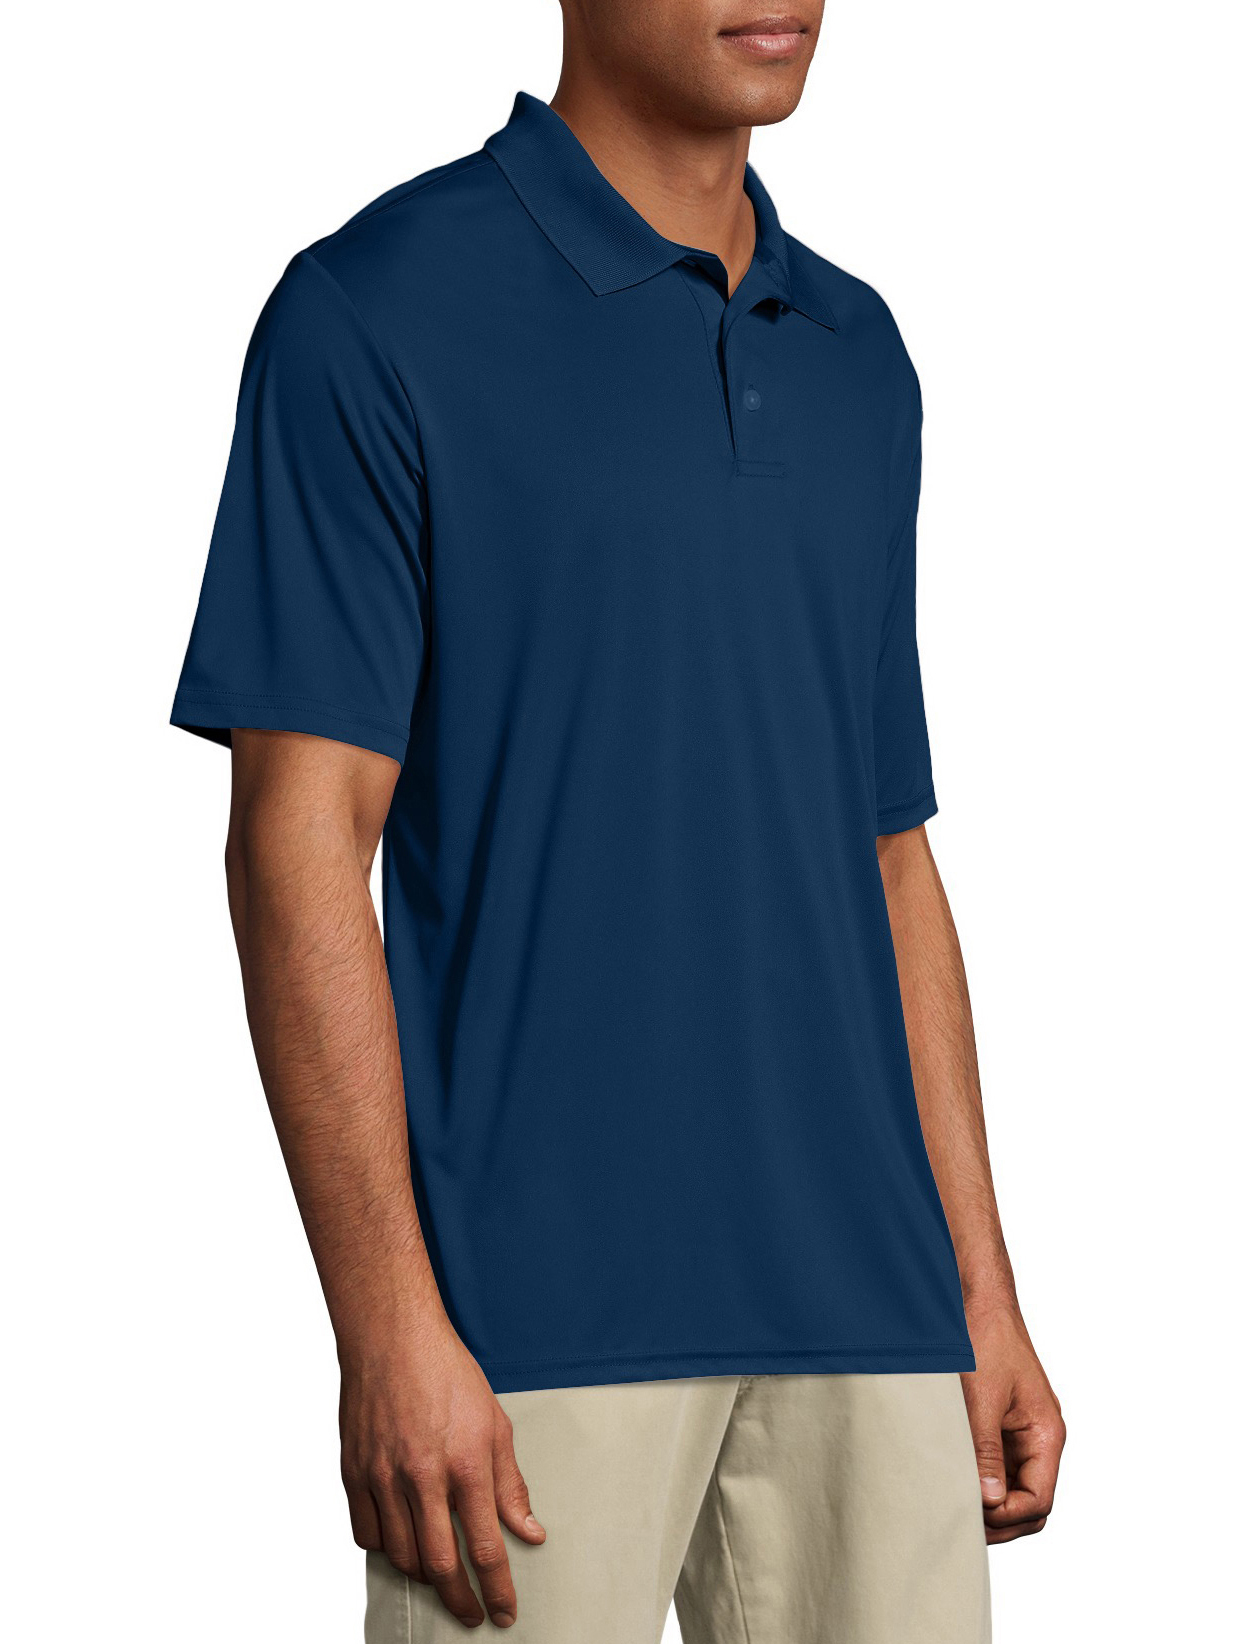 Hanes Sport Men's and Big Men's Cool Dri Performance Polo (40+ UPF), Up to Size 3XL - image 3 of 6